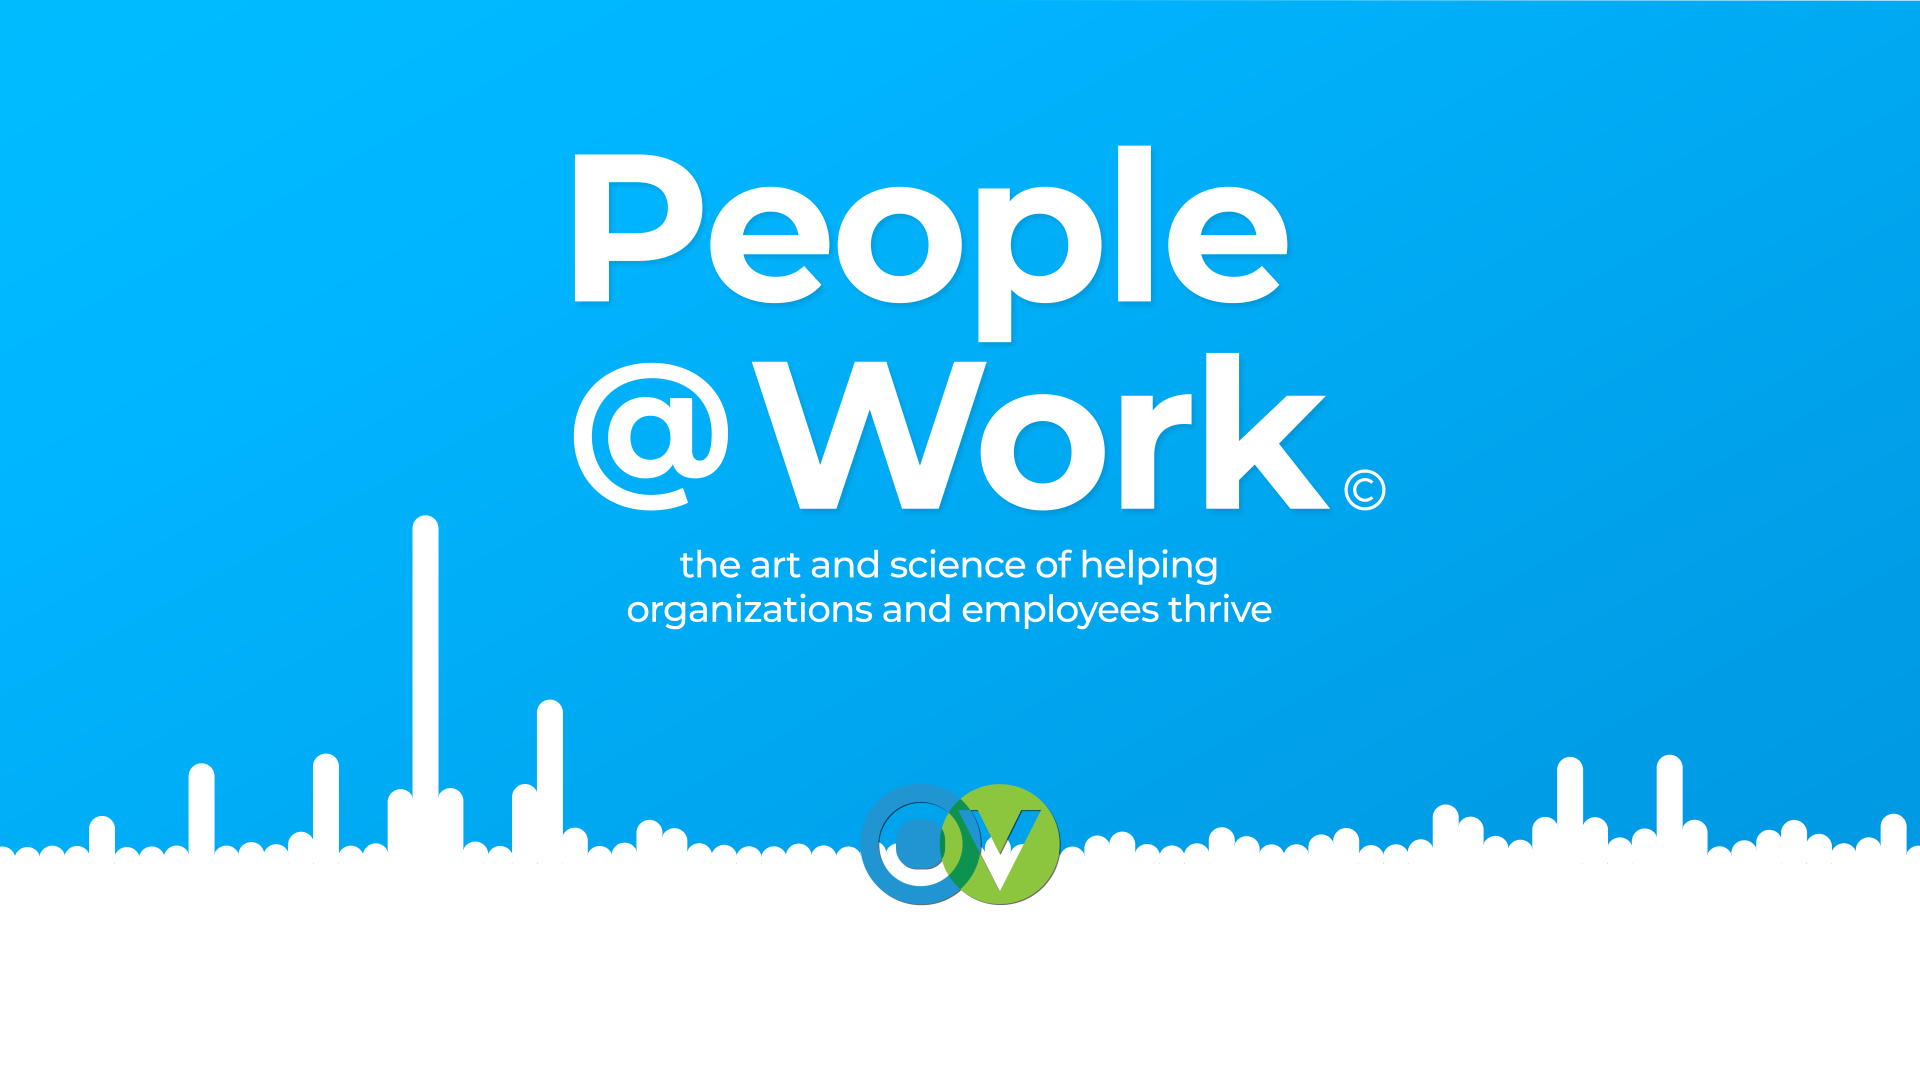 People @Work - Is The Employee Survey Dead? PepsiCo Says No